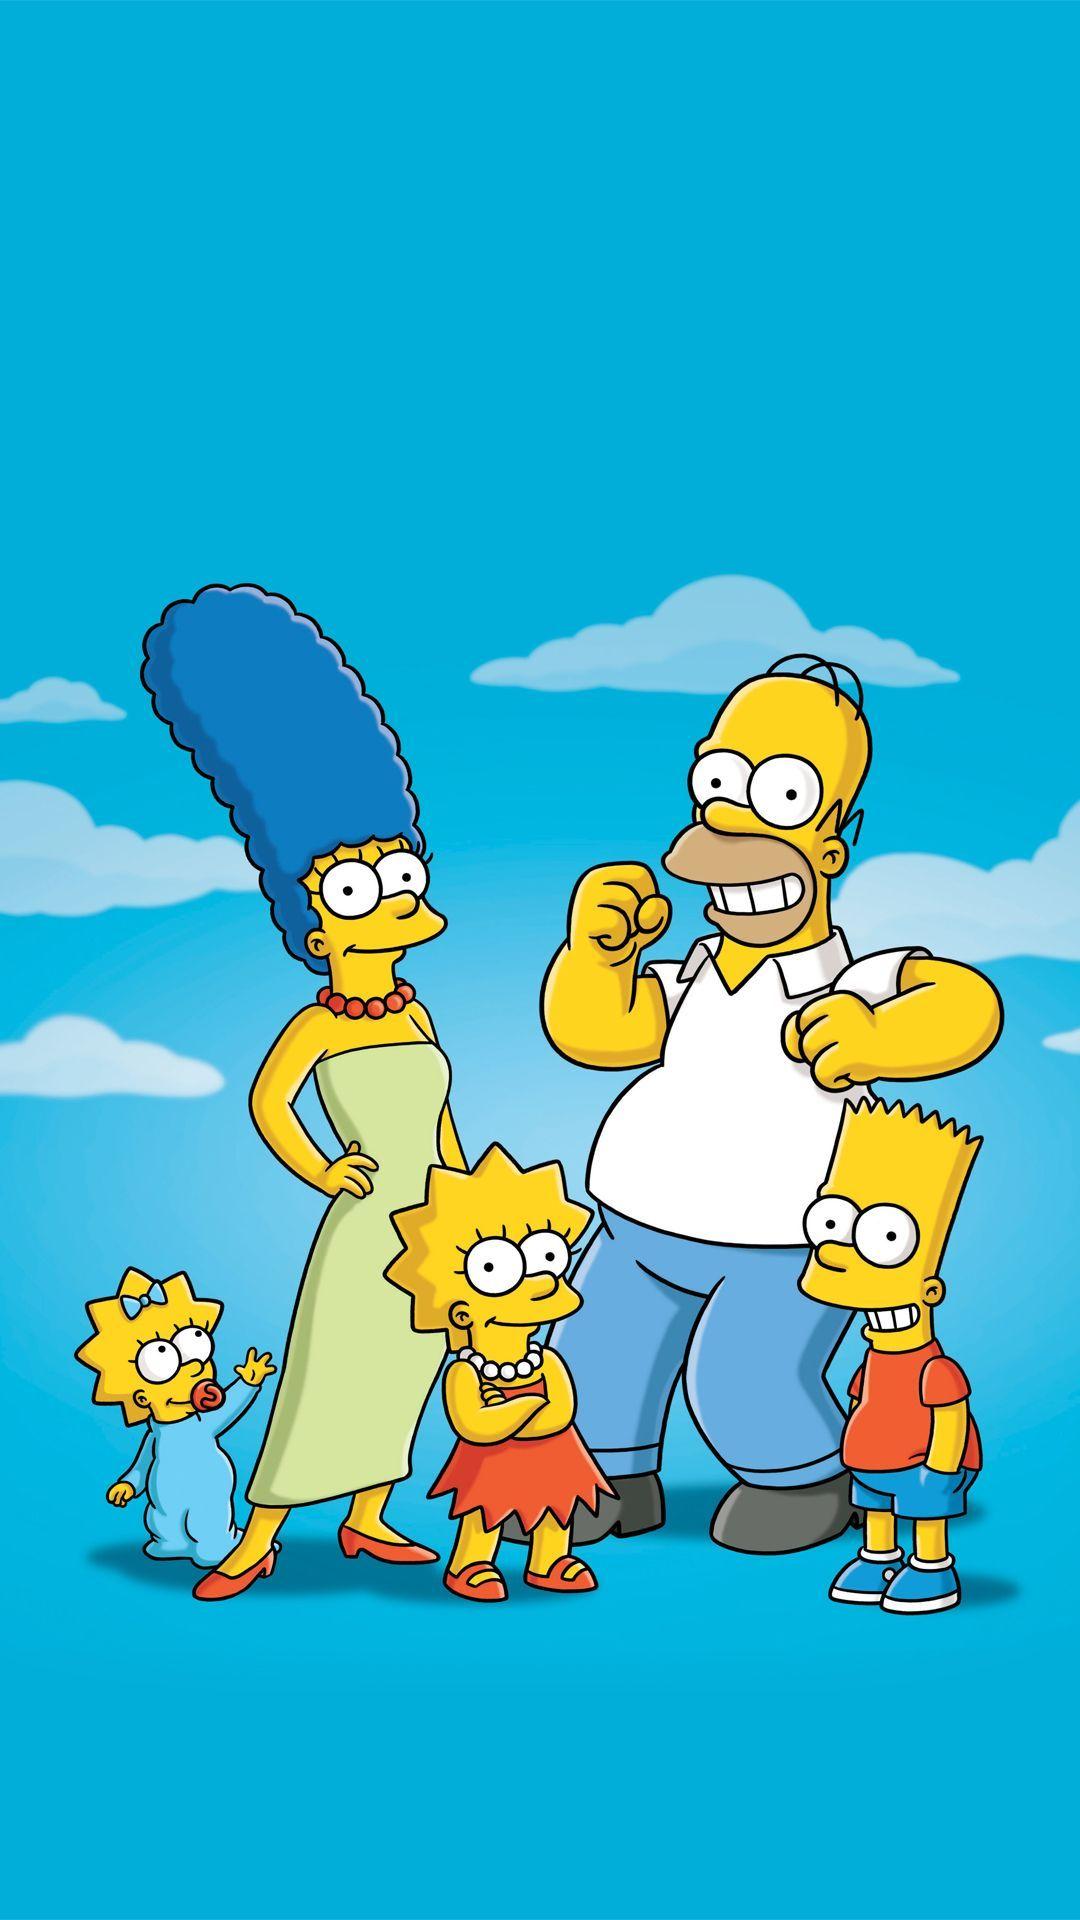 The Simpsons Family Funny HD Wallpaper for iPhone 6 is a